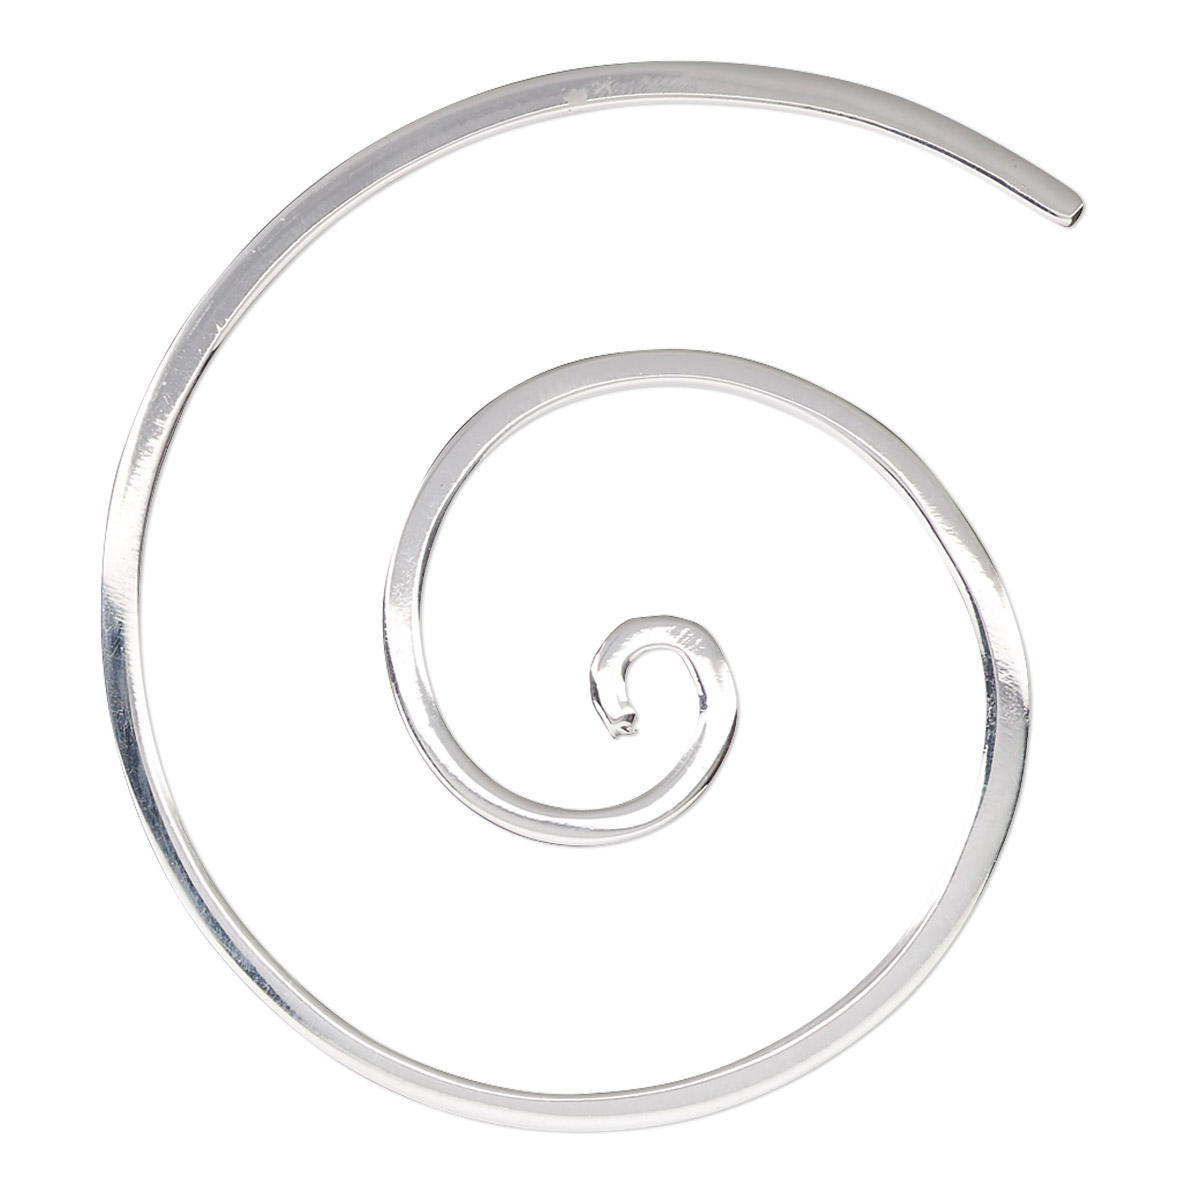 Focal, sterling silver, 30x27mm flat spiral. Sold individually. - Fire ...